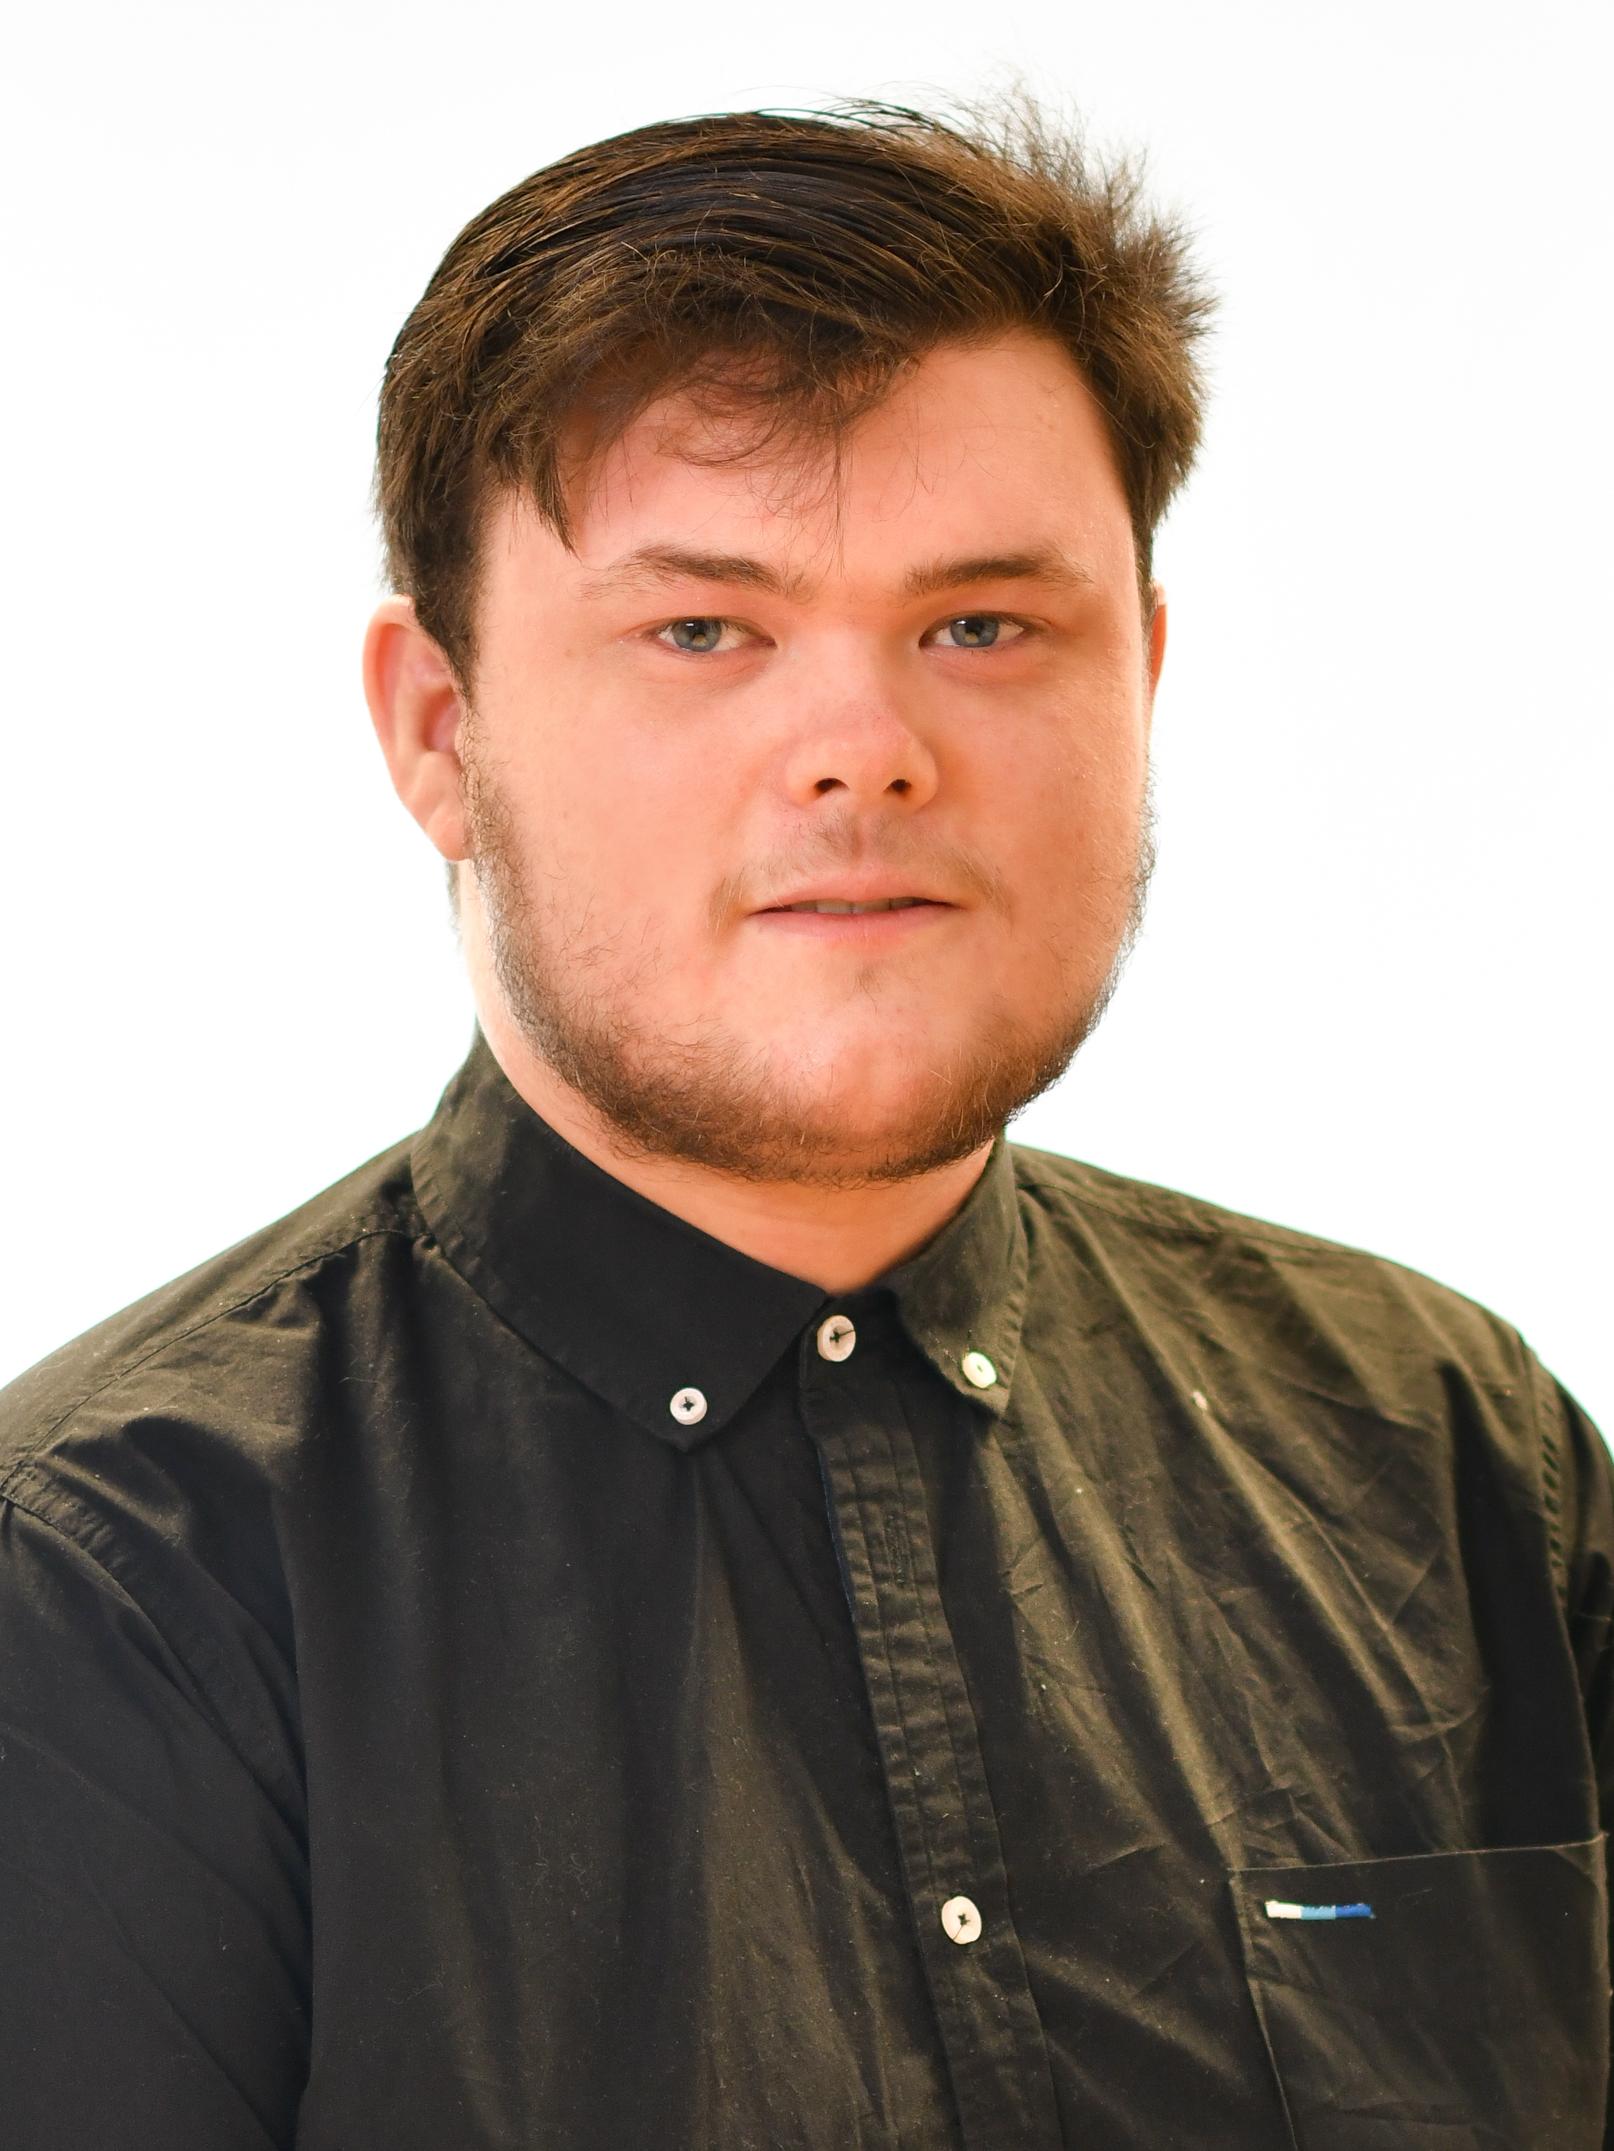 Careers Information Assistant Jacob Smith